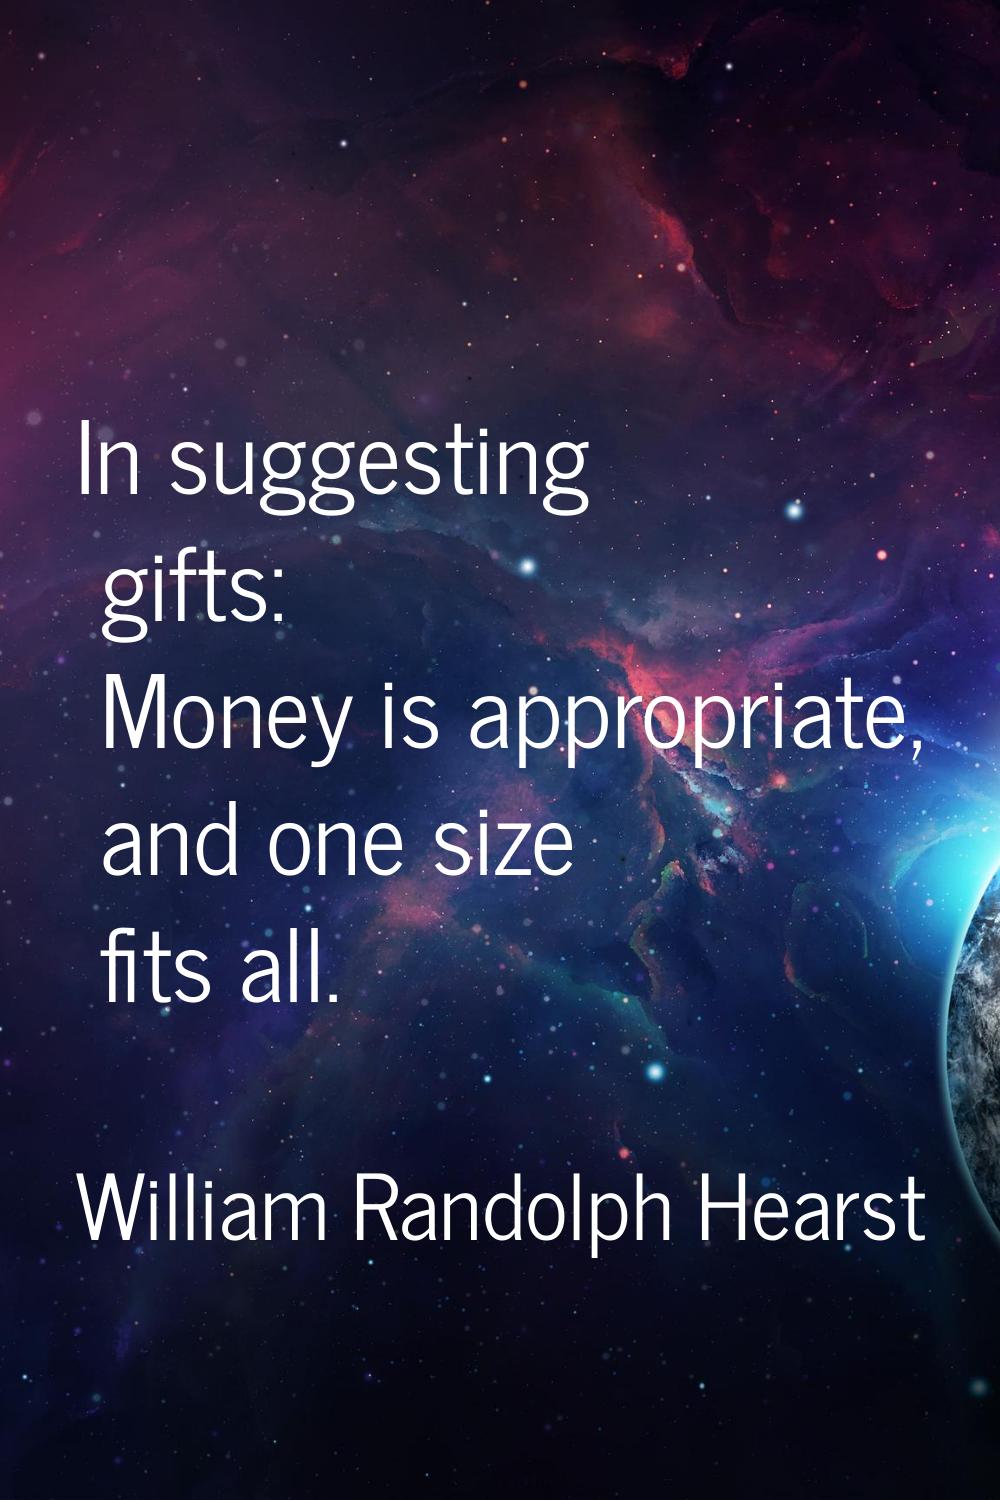 In suggesting gifts: Money is appropriate, and one size fits all.